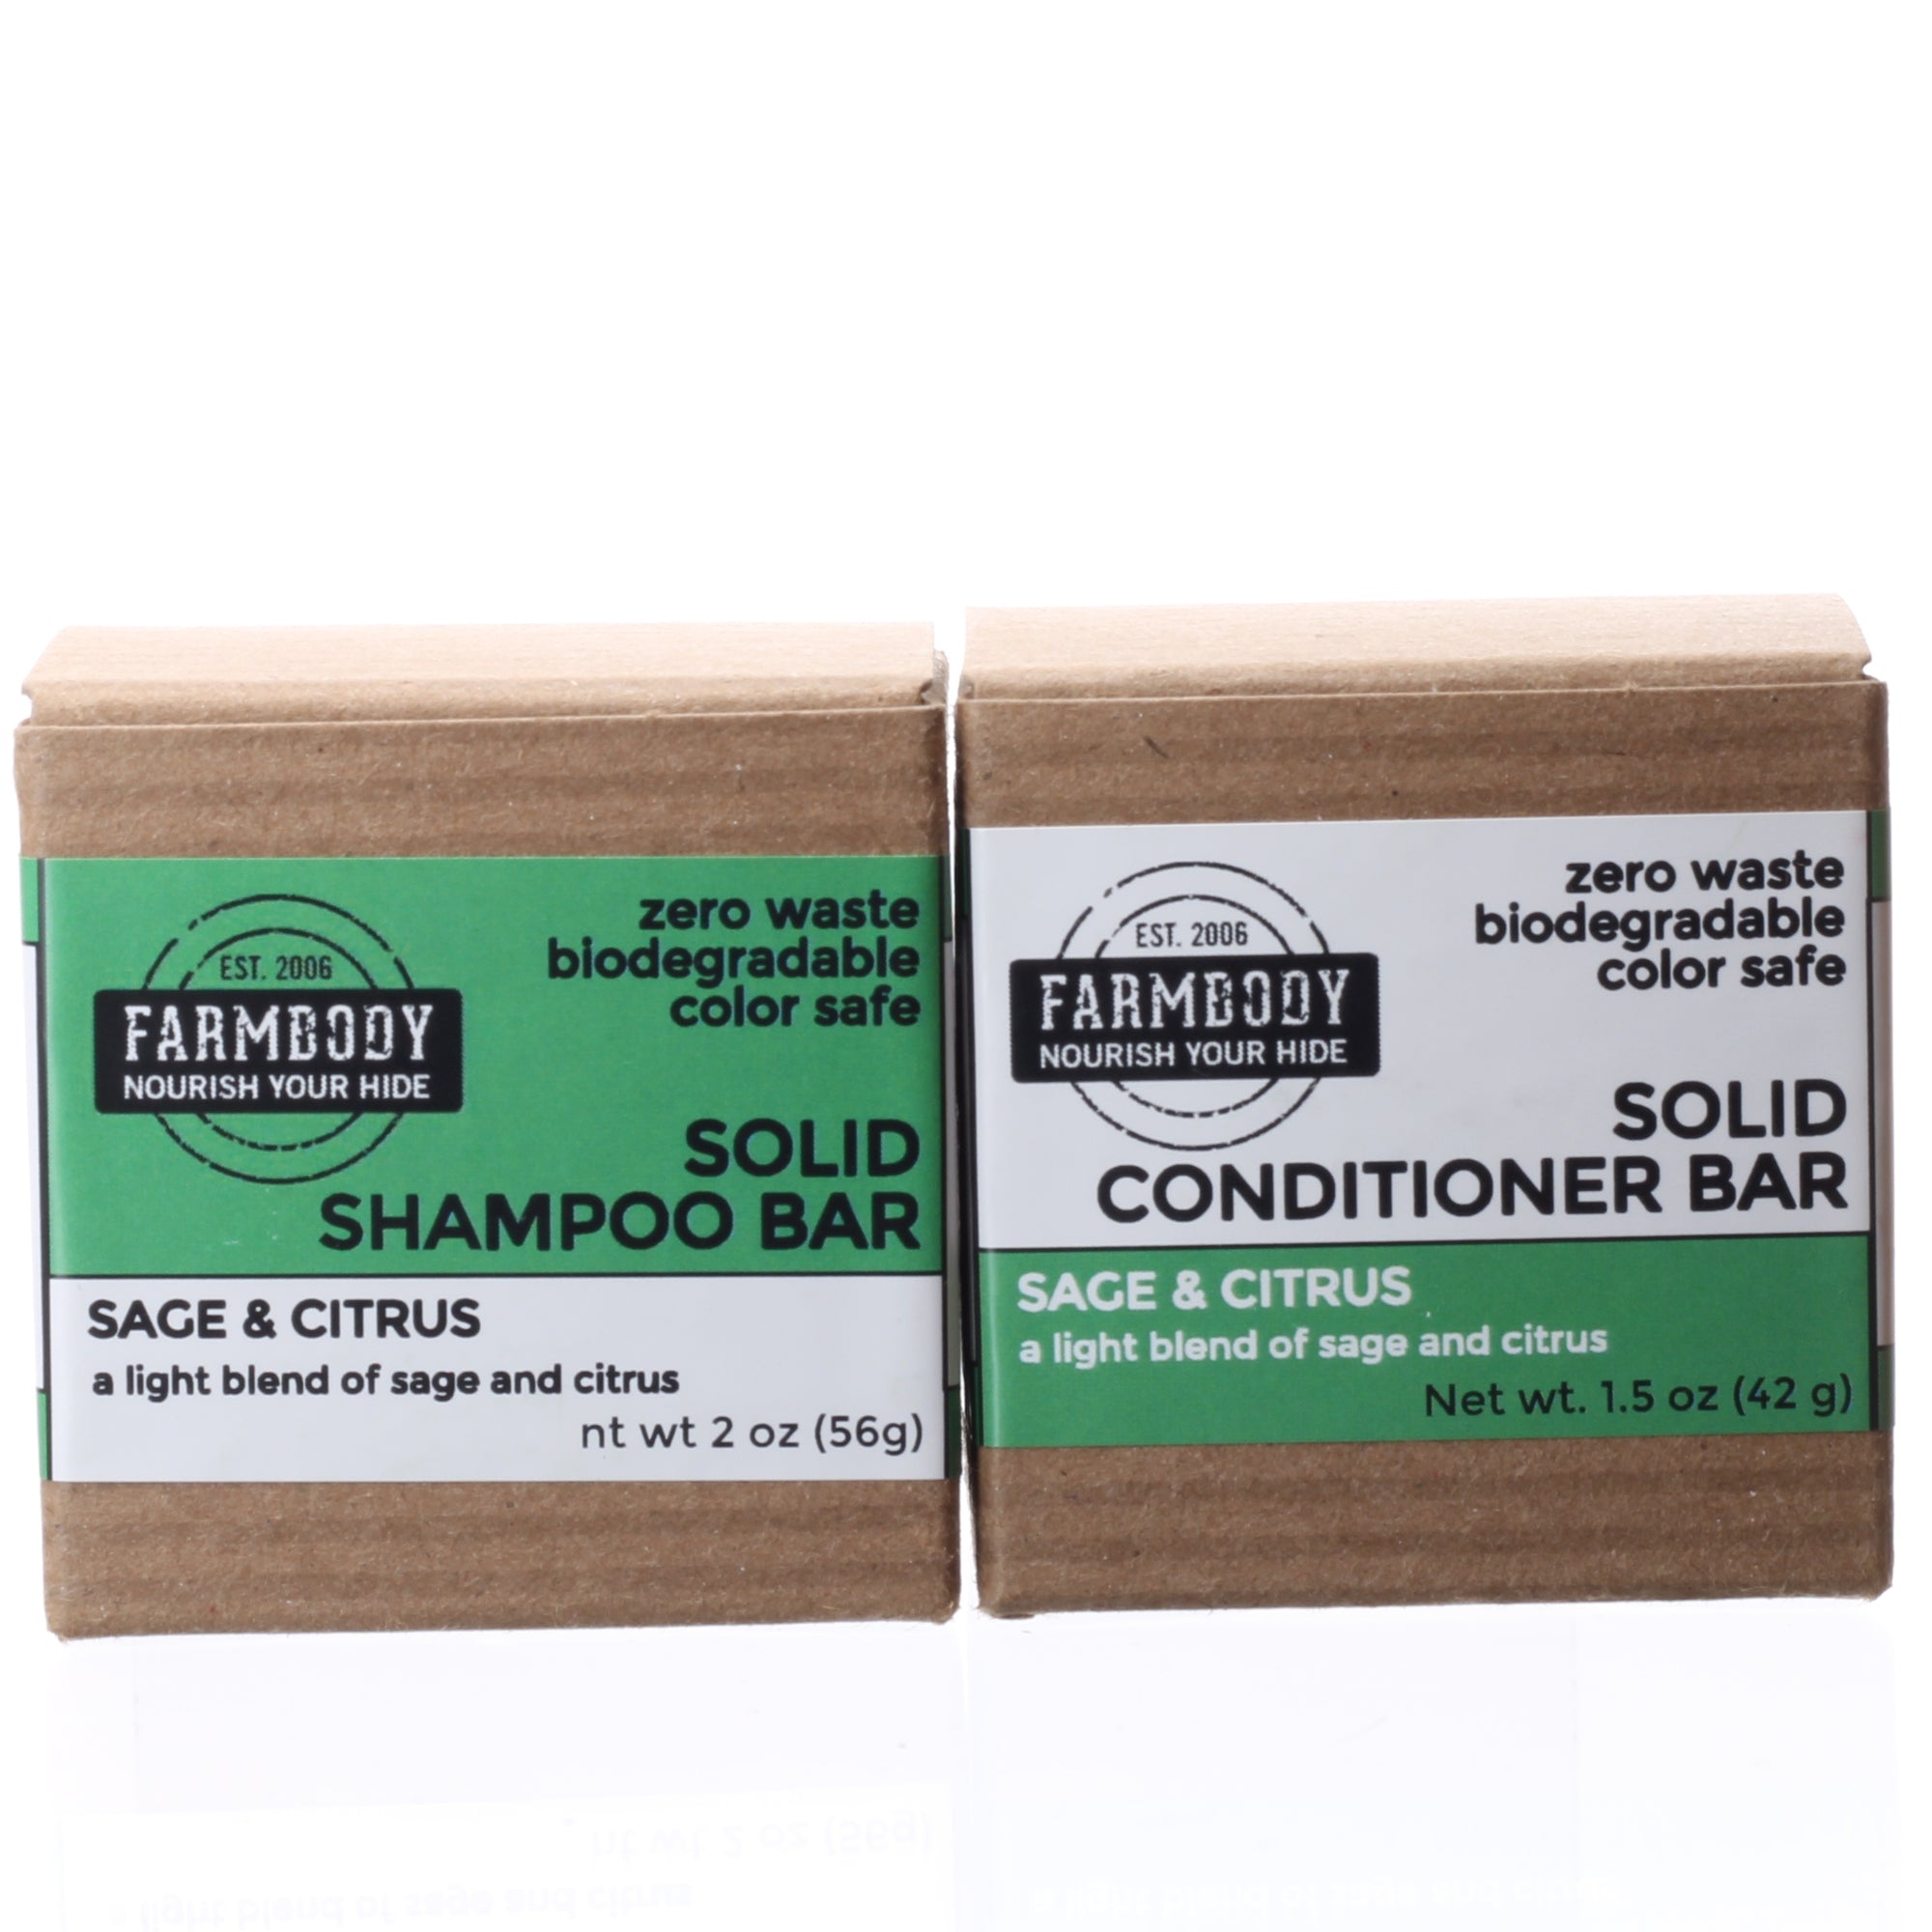 Farmbody set of solid shampoo bar and solid conditioner bar set zero waste biodegradable color safe